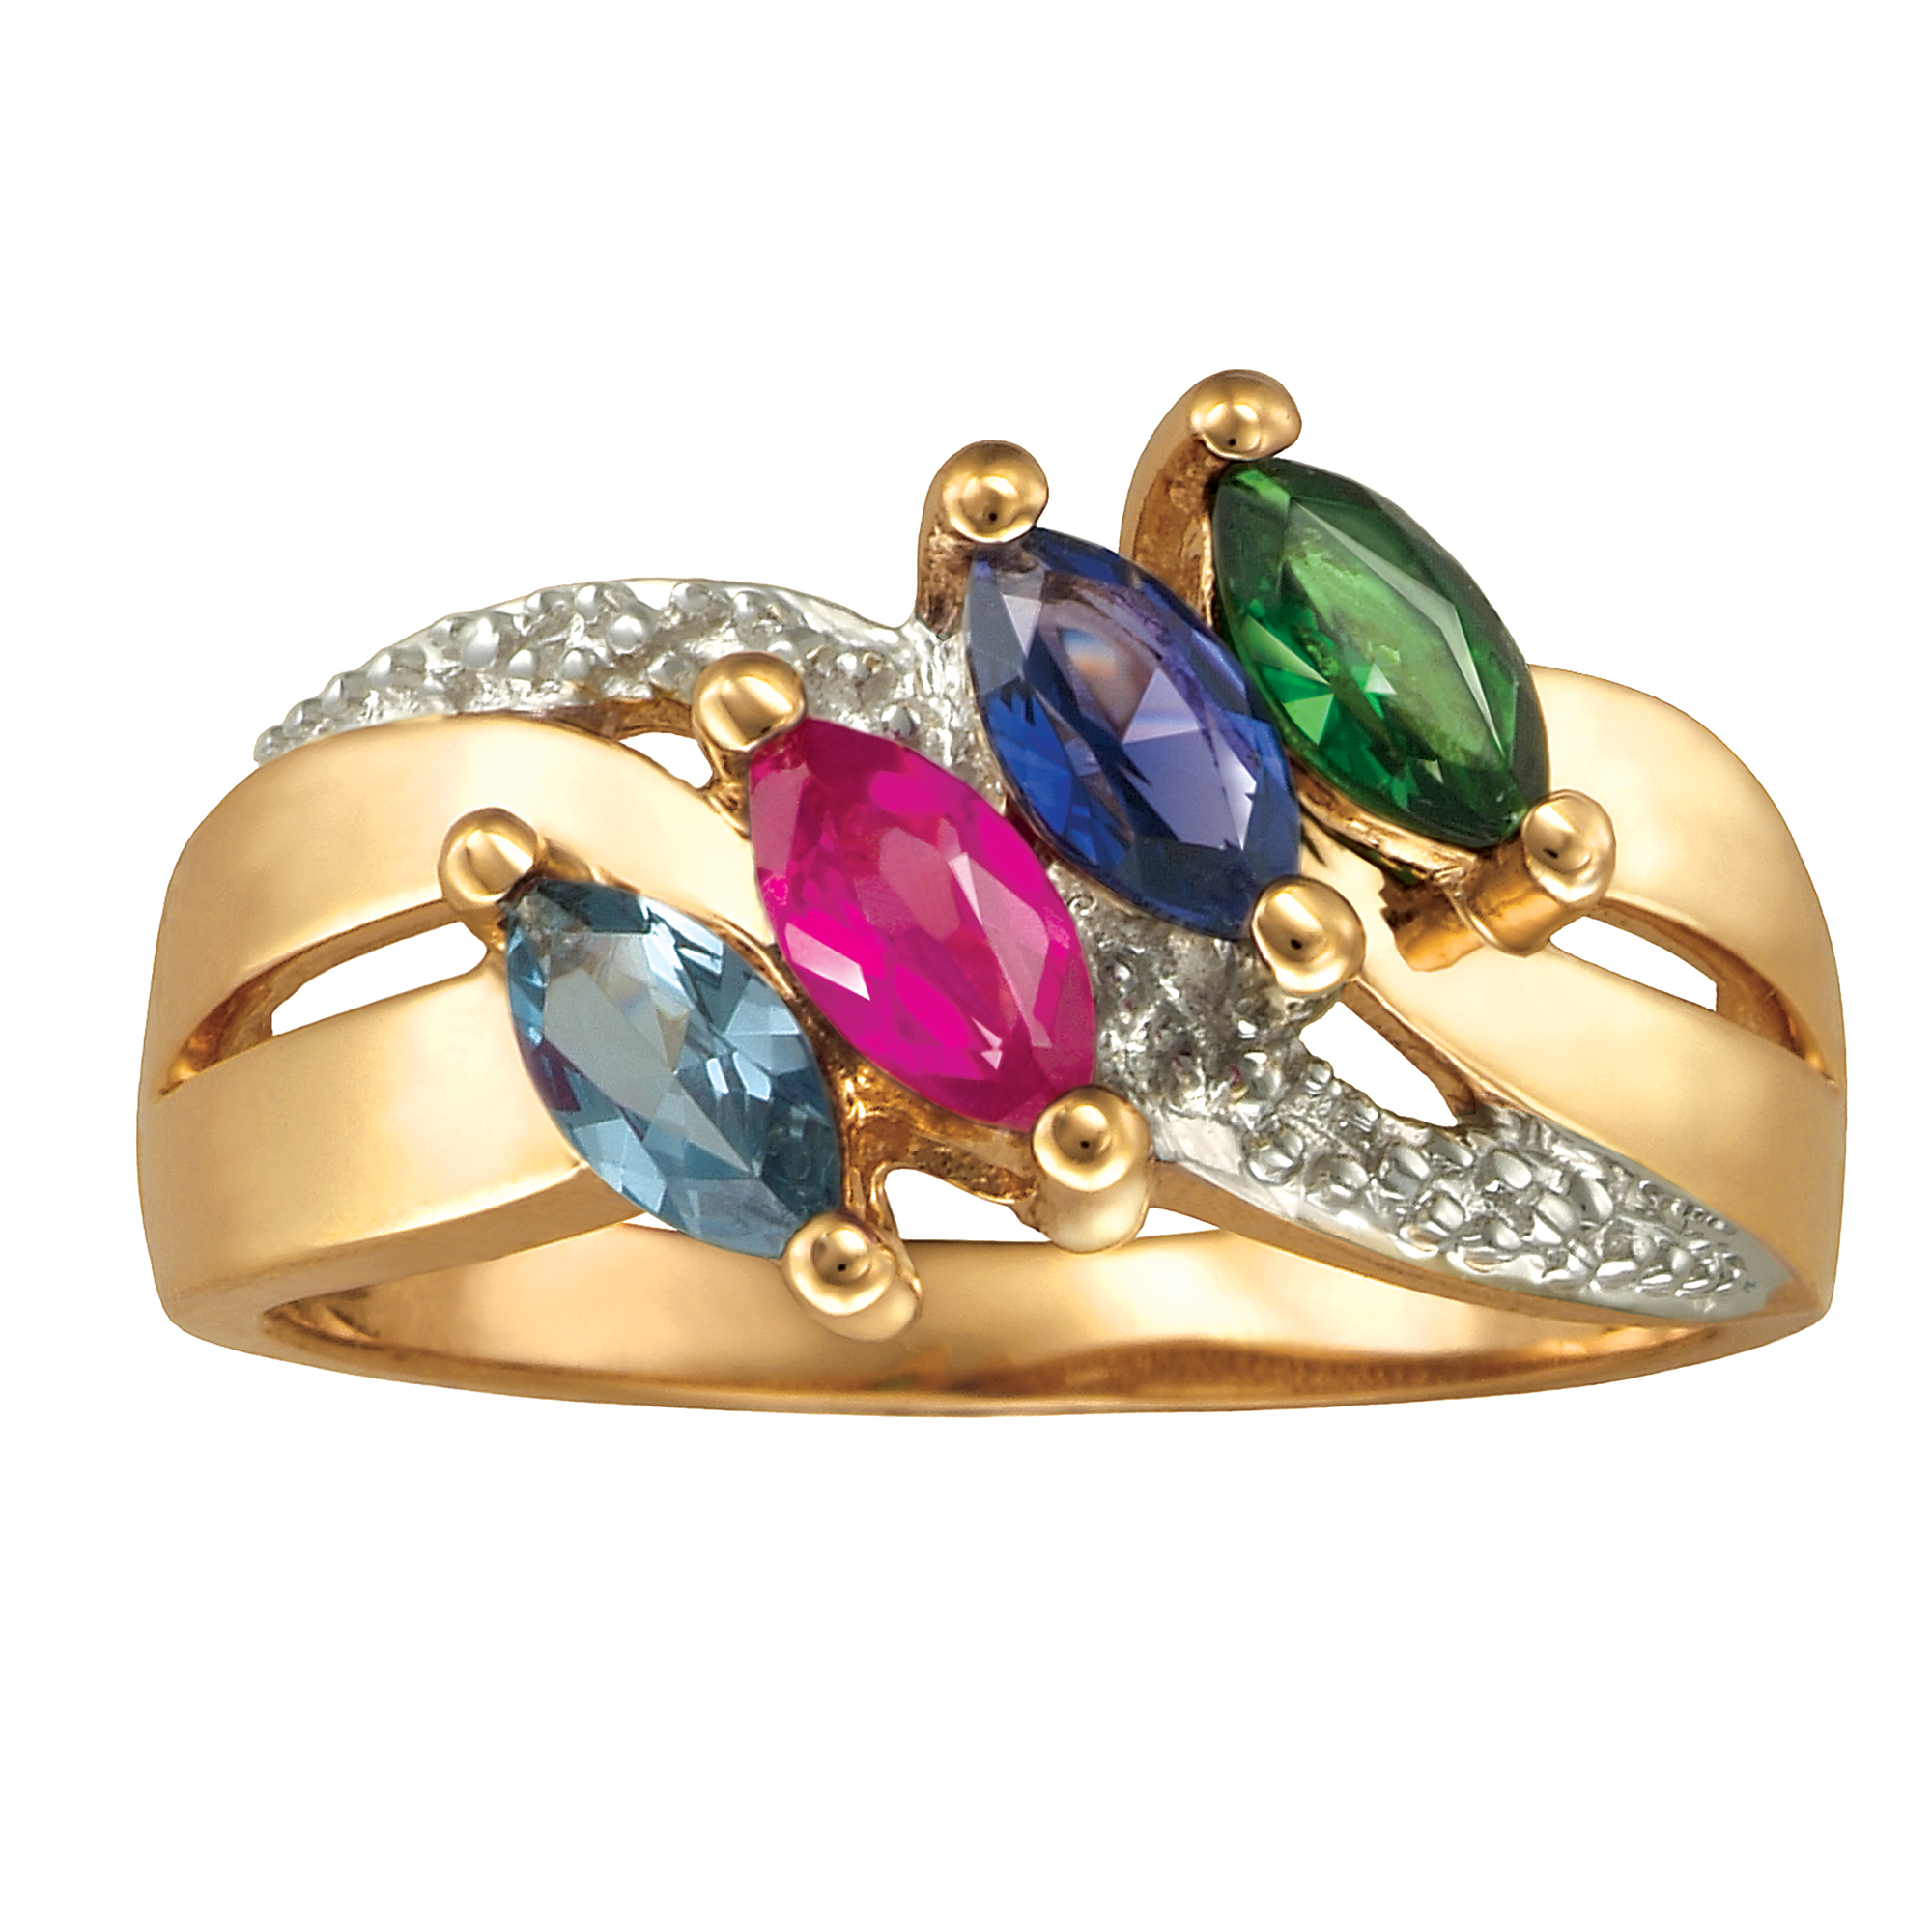 Image of Ladies' Family Ring with Four Marquise-Cut Birthstones: Lustre